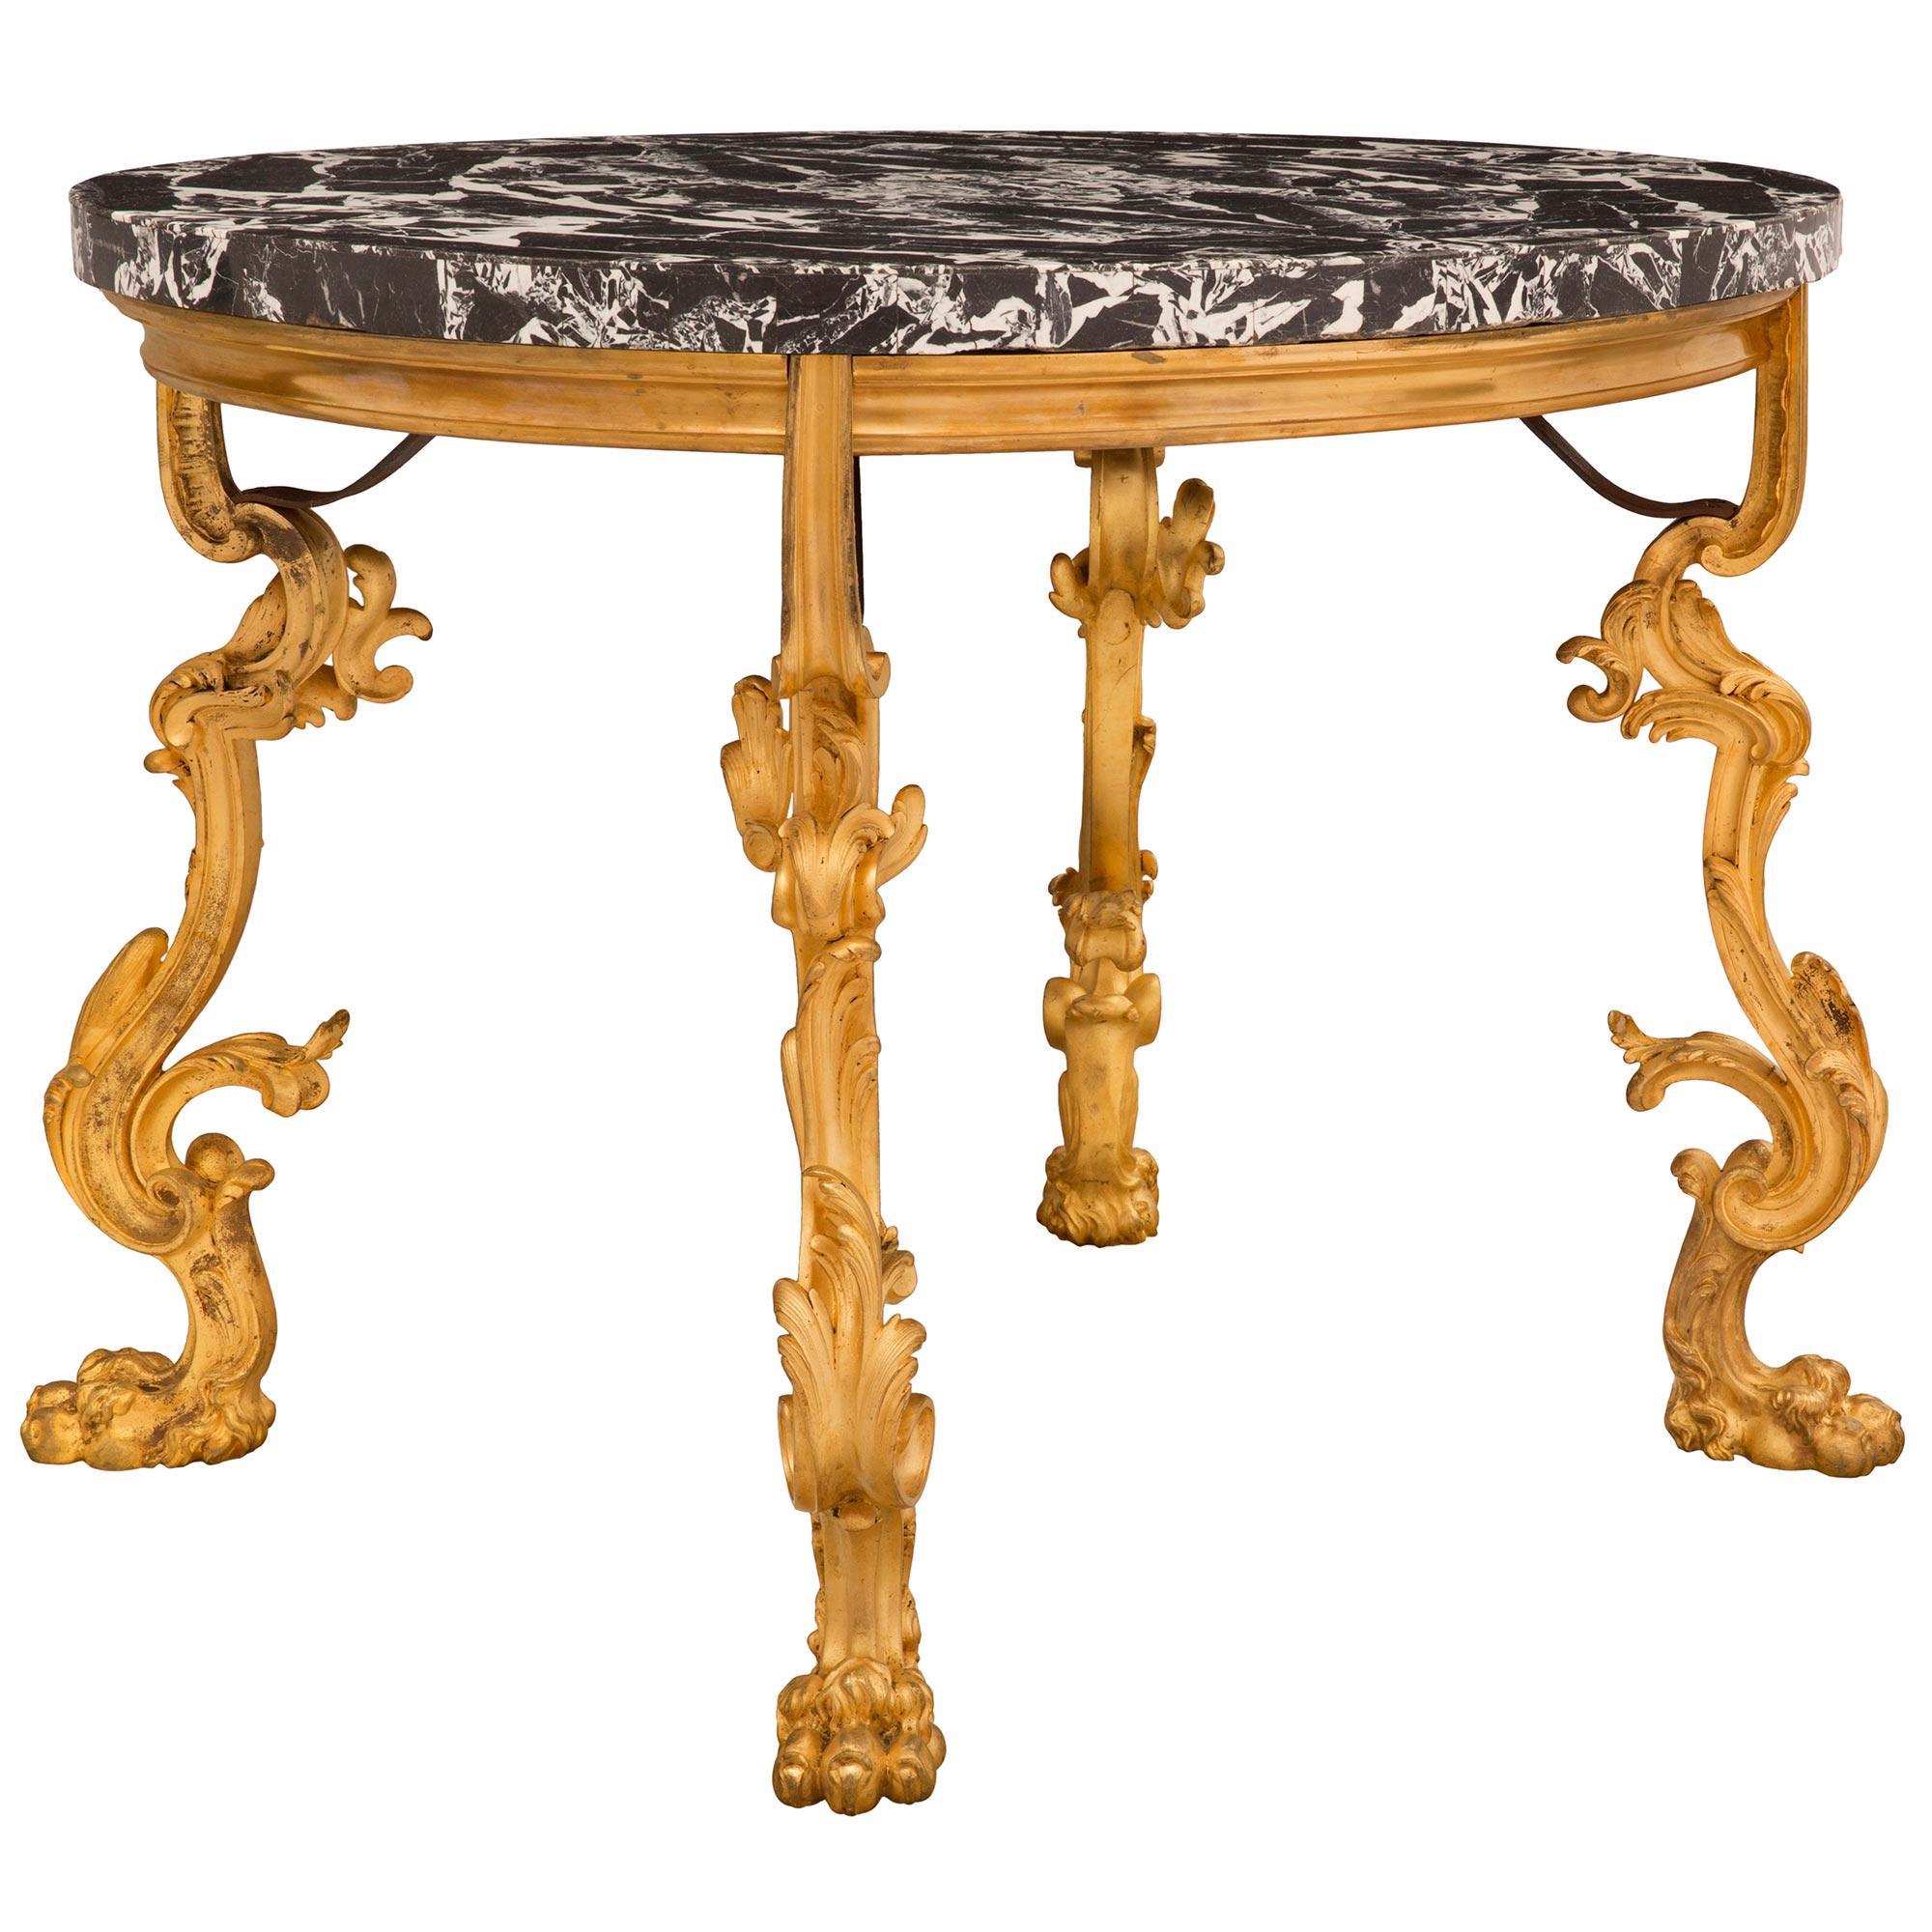 Neoclassical French Mid-19th Century Louis XV Style Oval Center Table For Sale